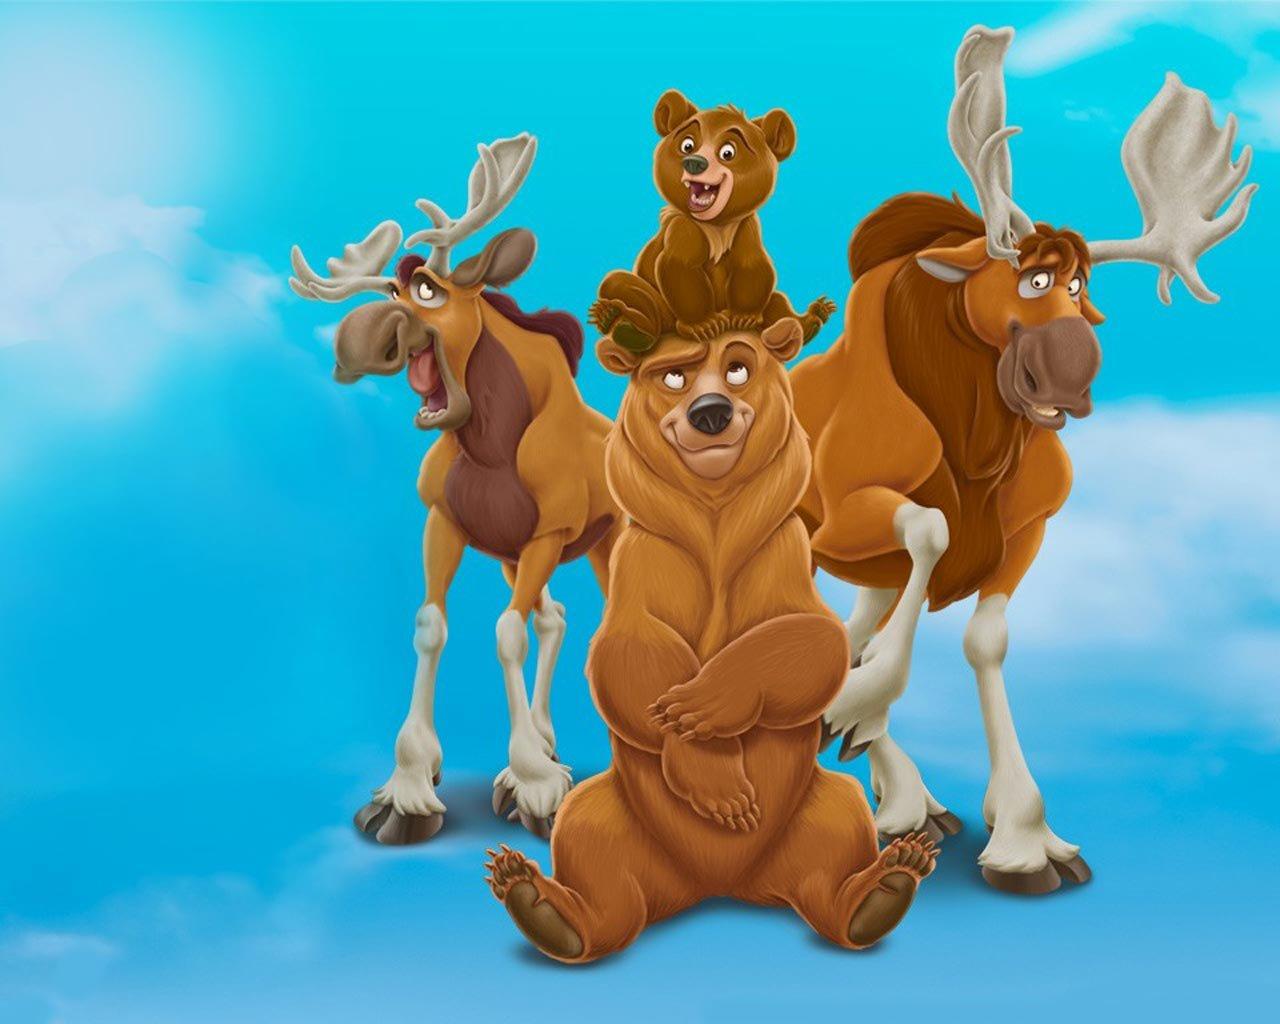 Wallpapers of Brother Bear.